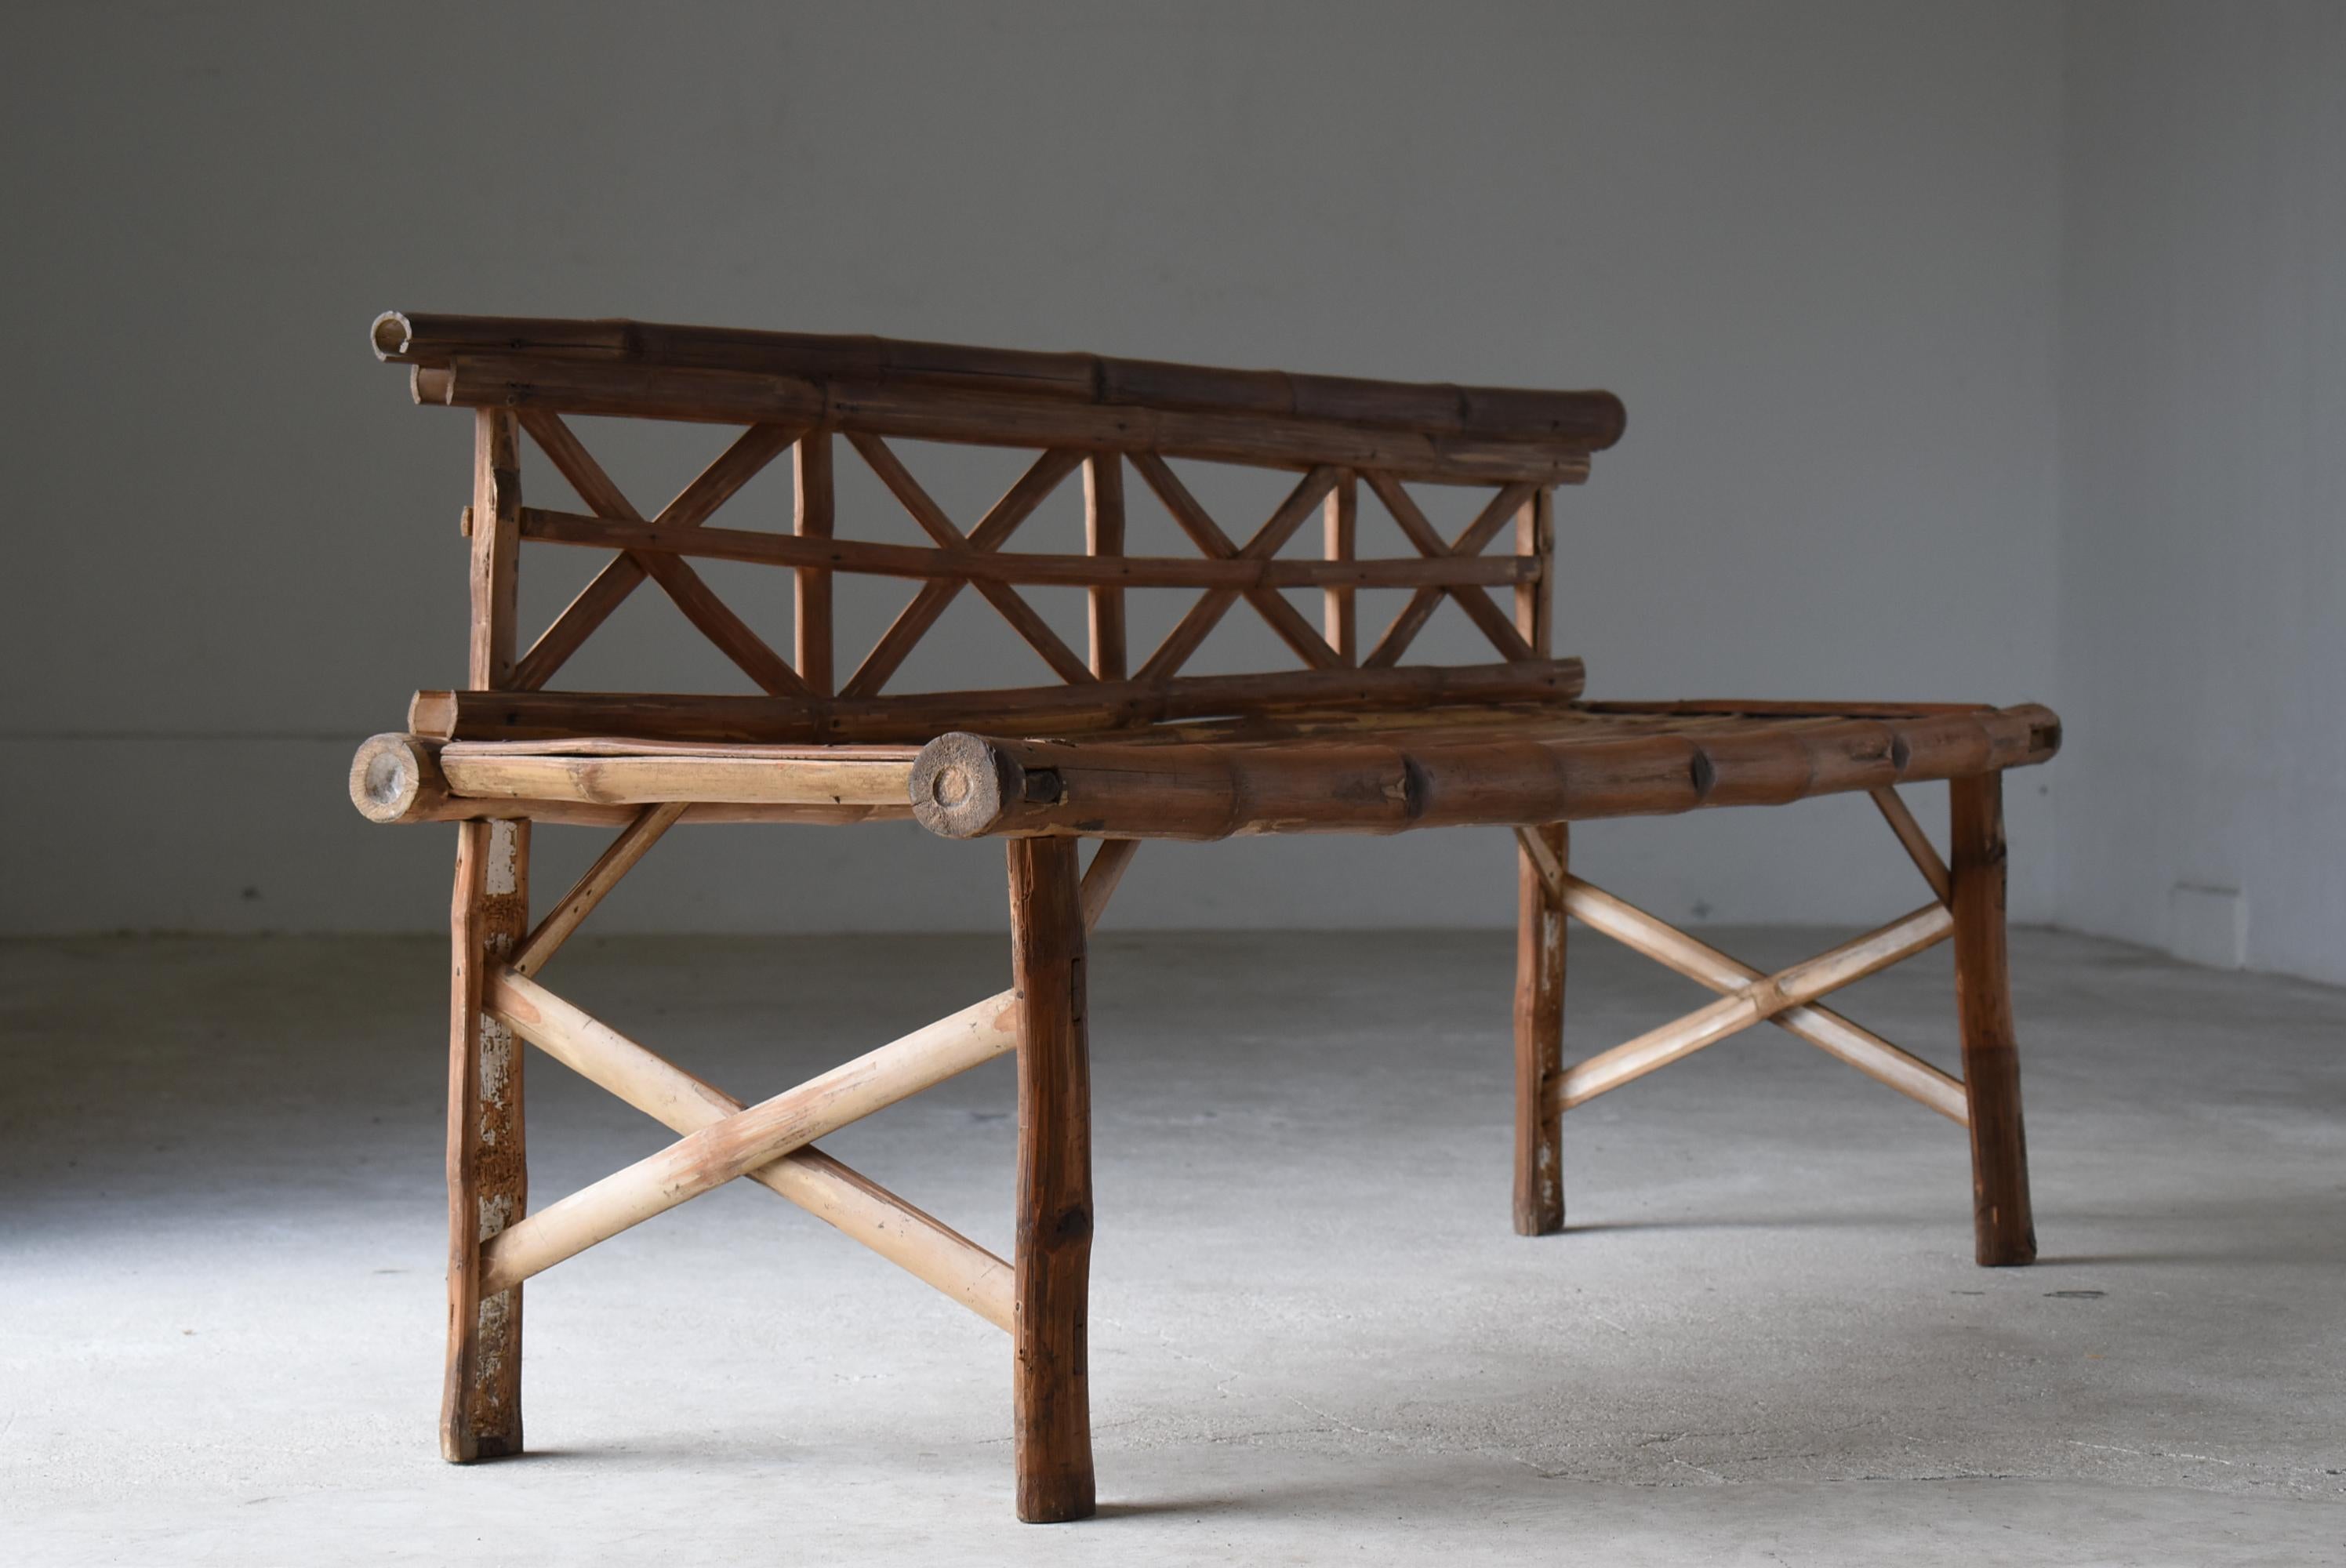 Japanese Old Bamboo Bench 1940s-1960s / Long Chair Mingei Wabisabi 2